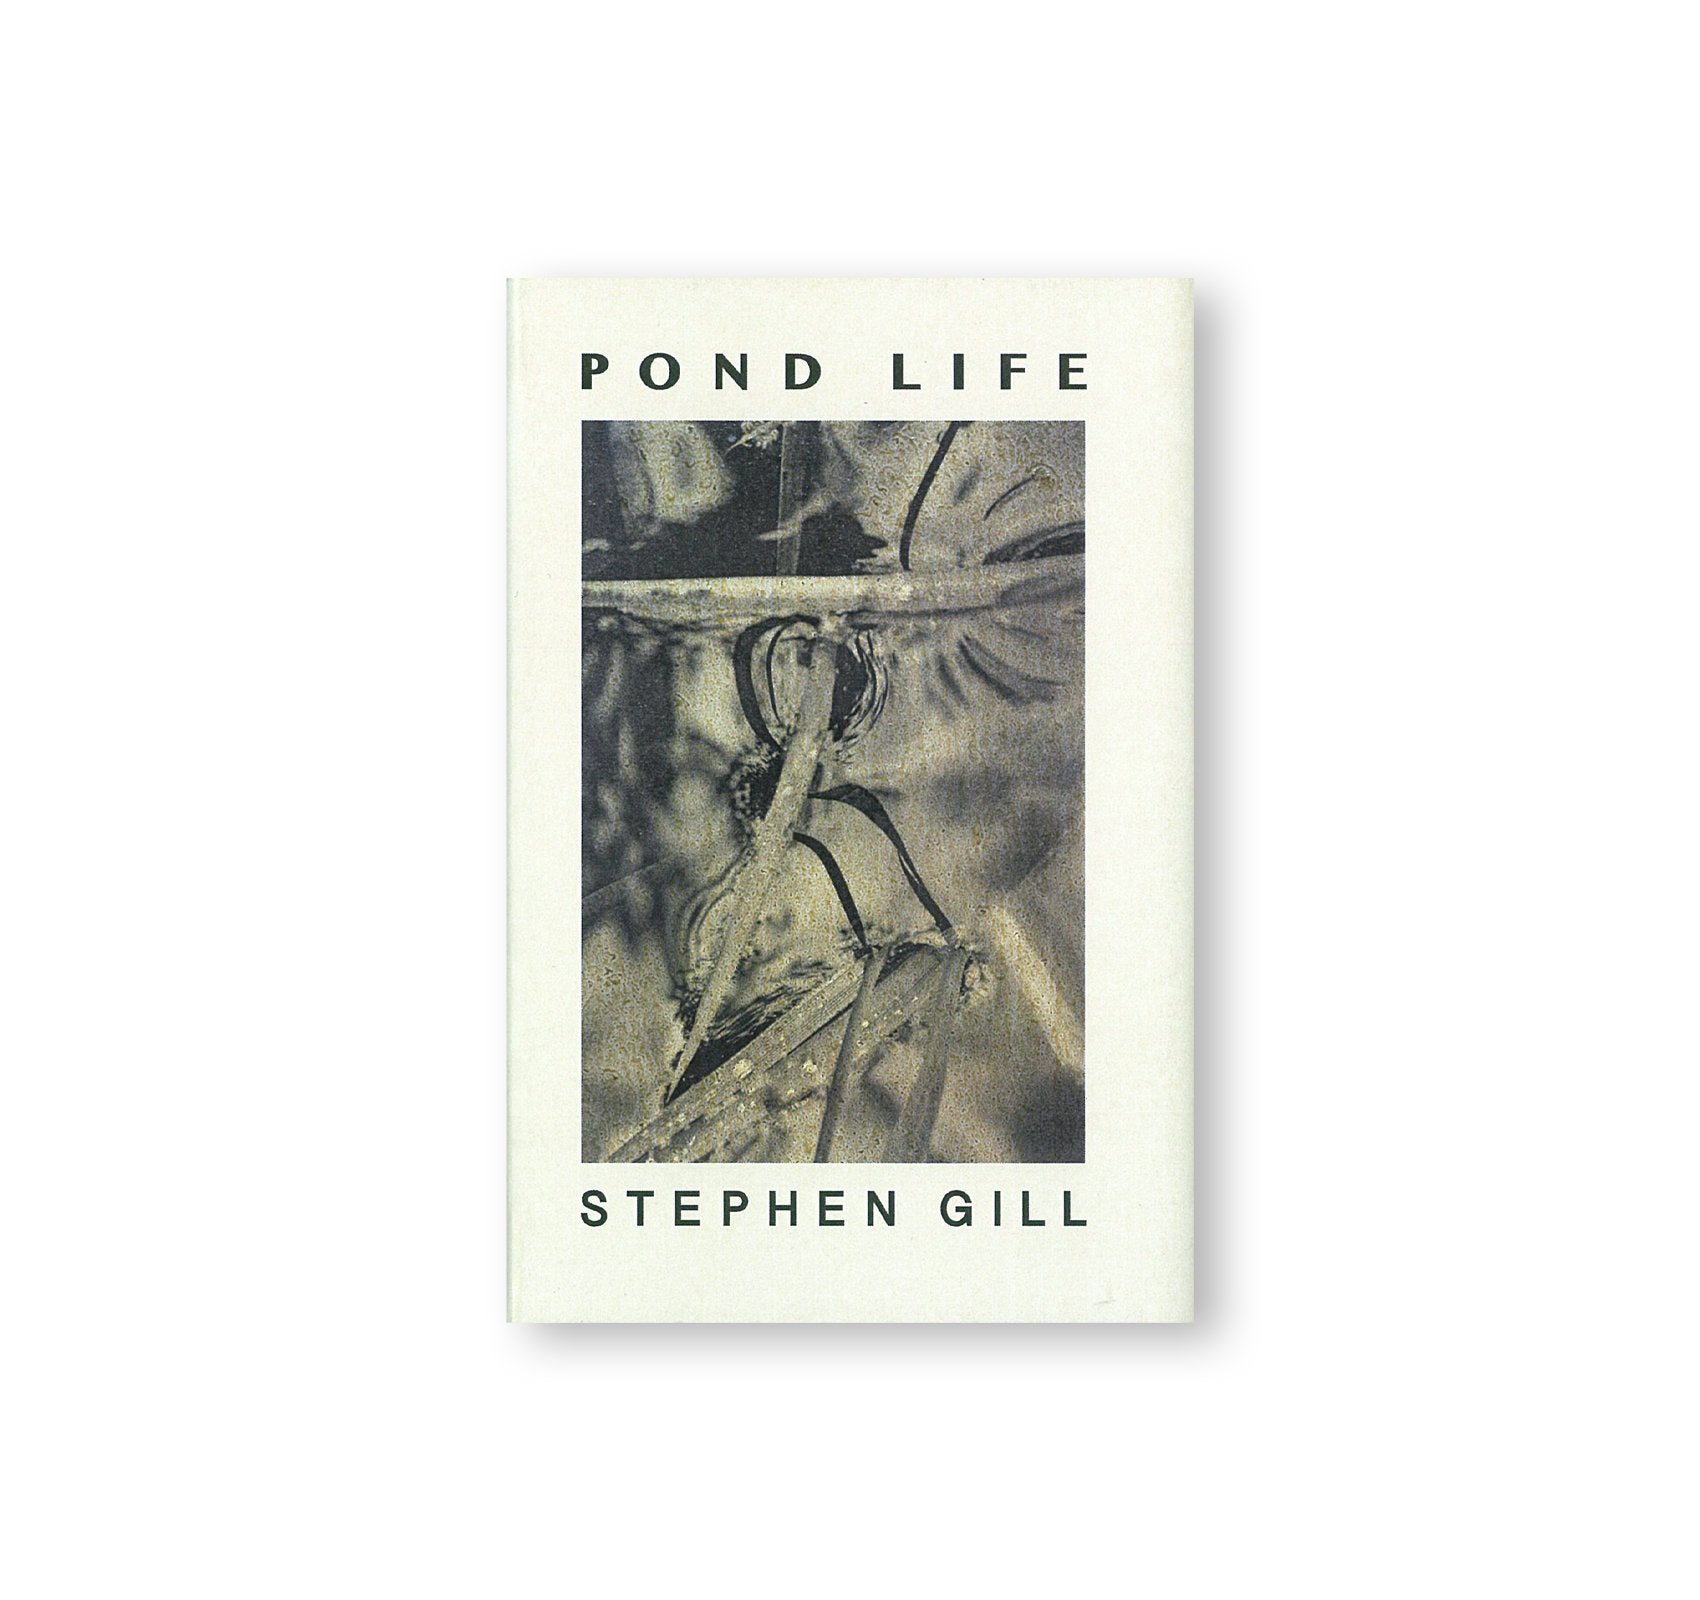 POND LIFE by Stephen Gill